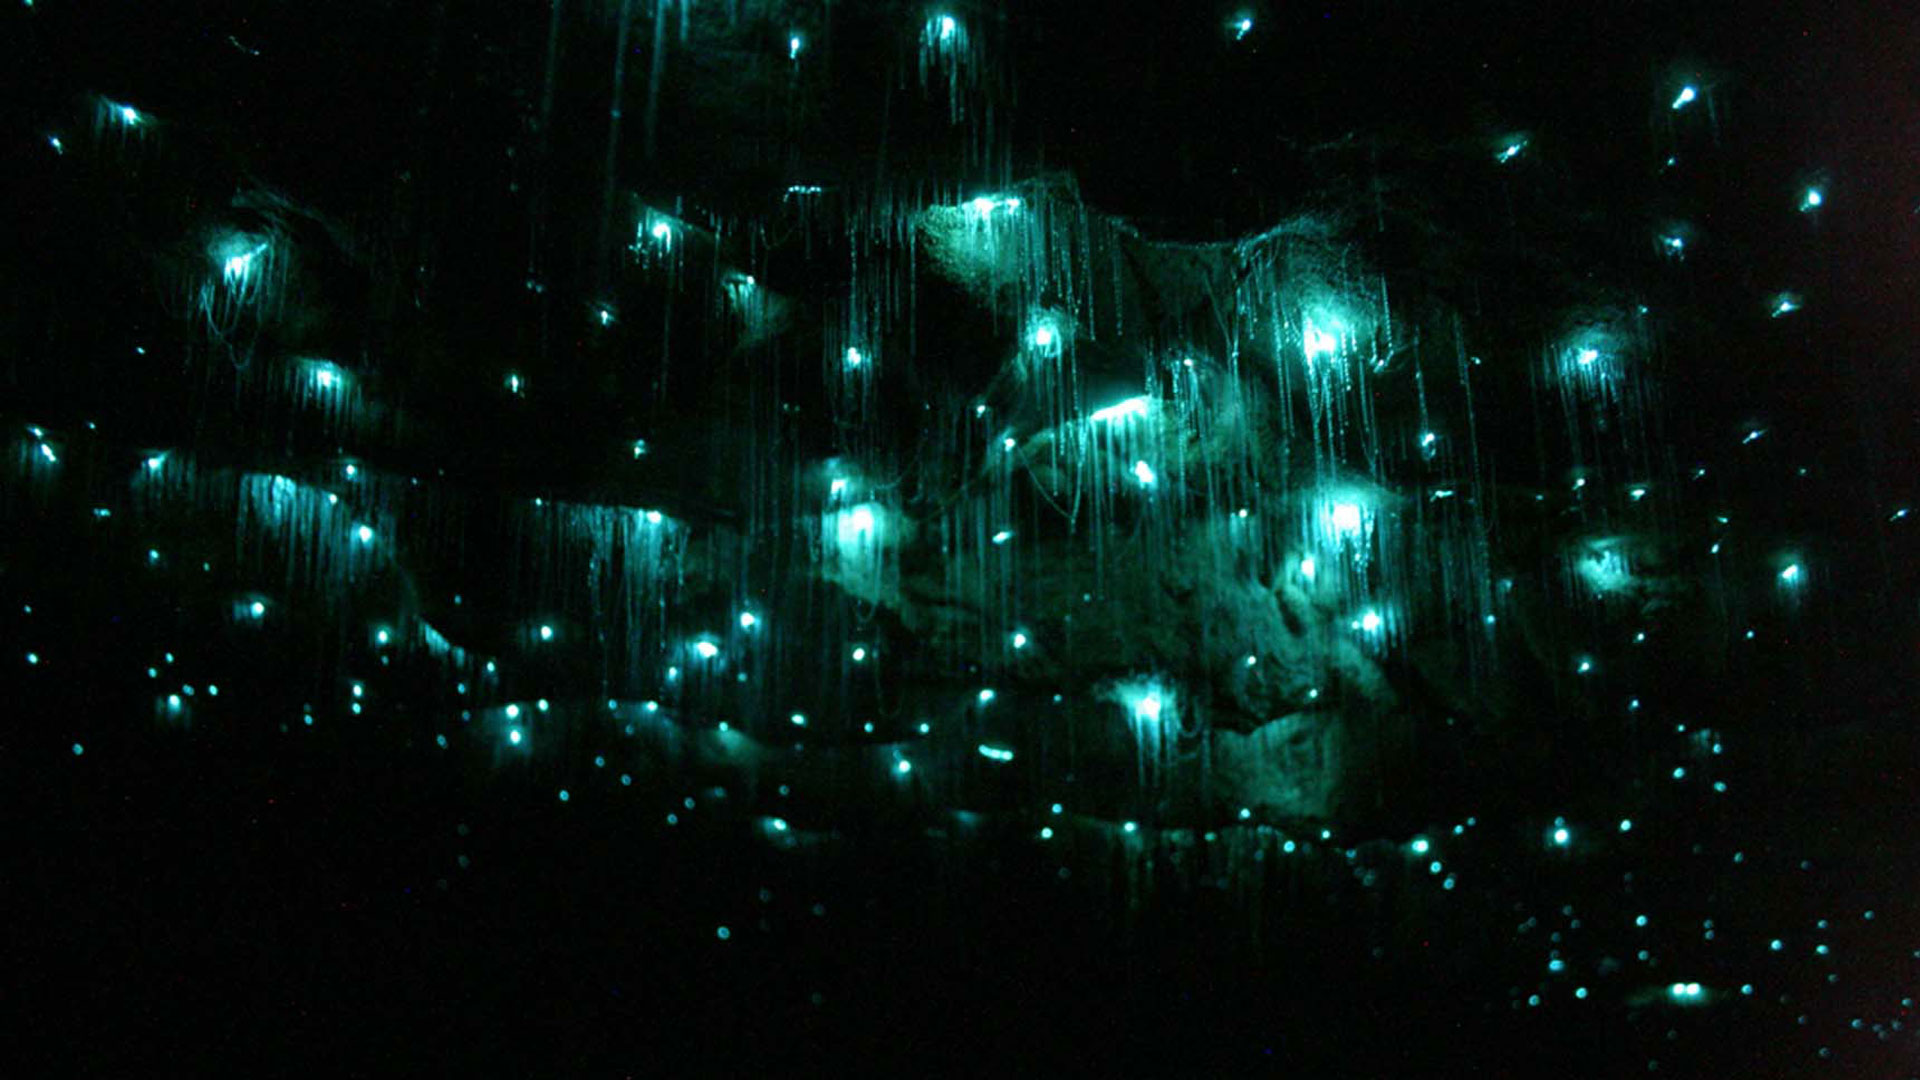 The Waitomo Caves in New Zealand are inhabited by thousands of glow worms that give off beautiful luminescent light.